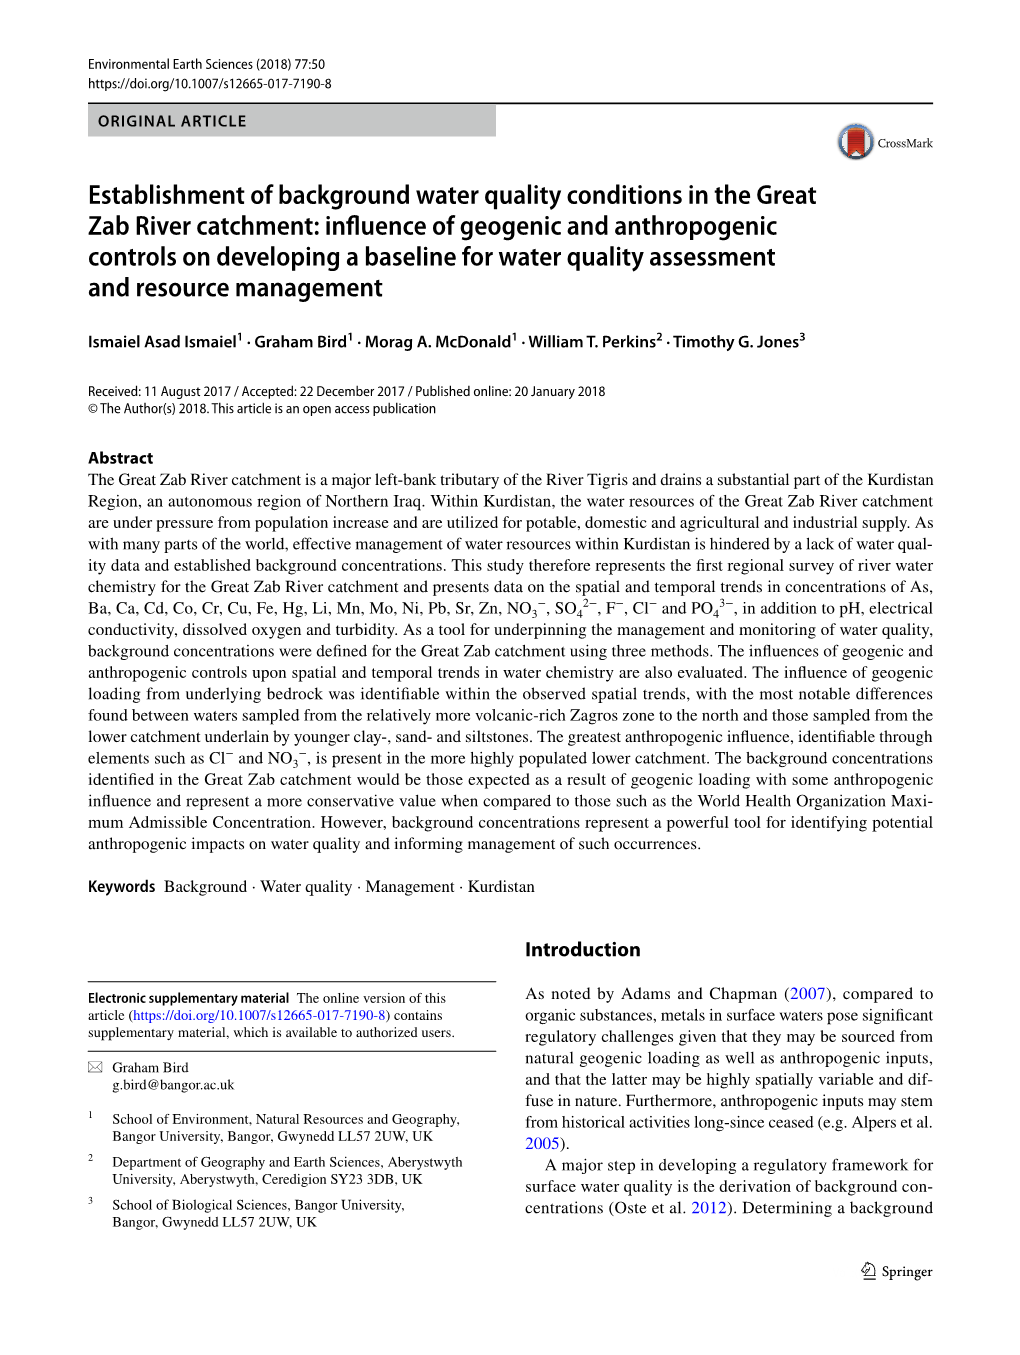 Establishment of Background Water Quality Conditions in the Great Zab